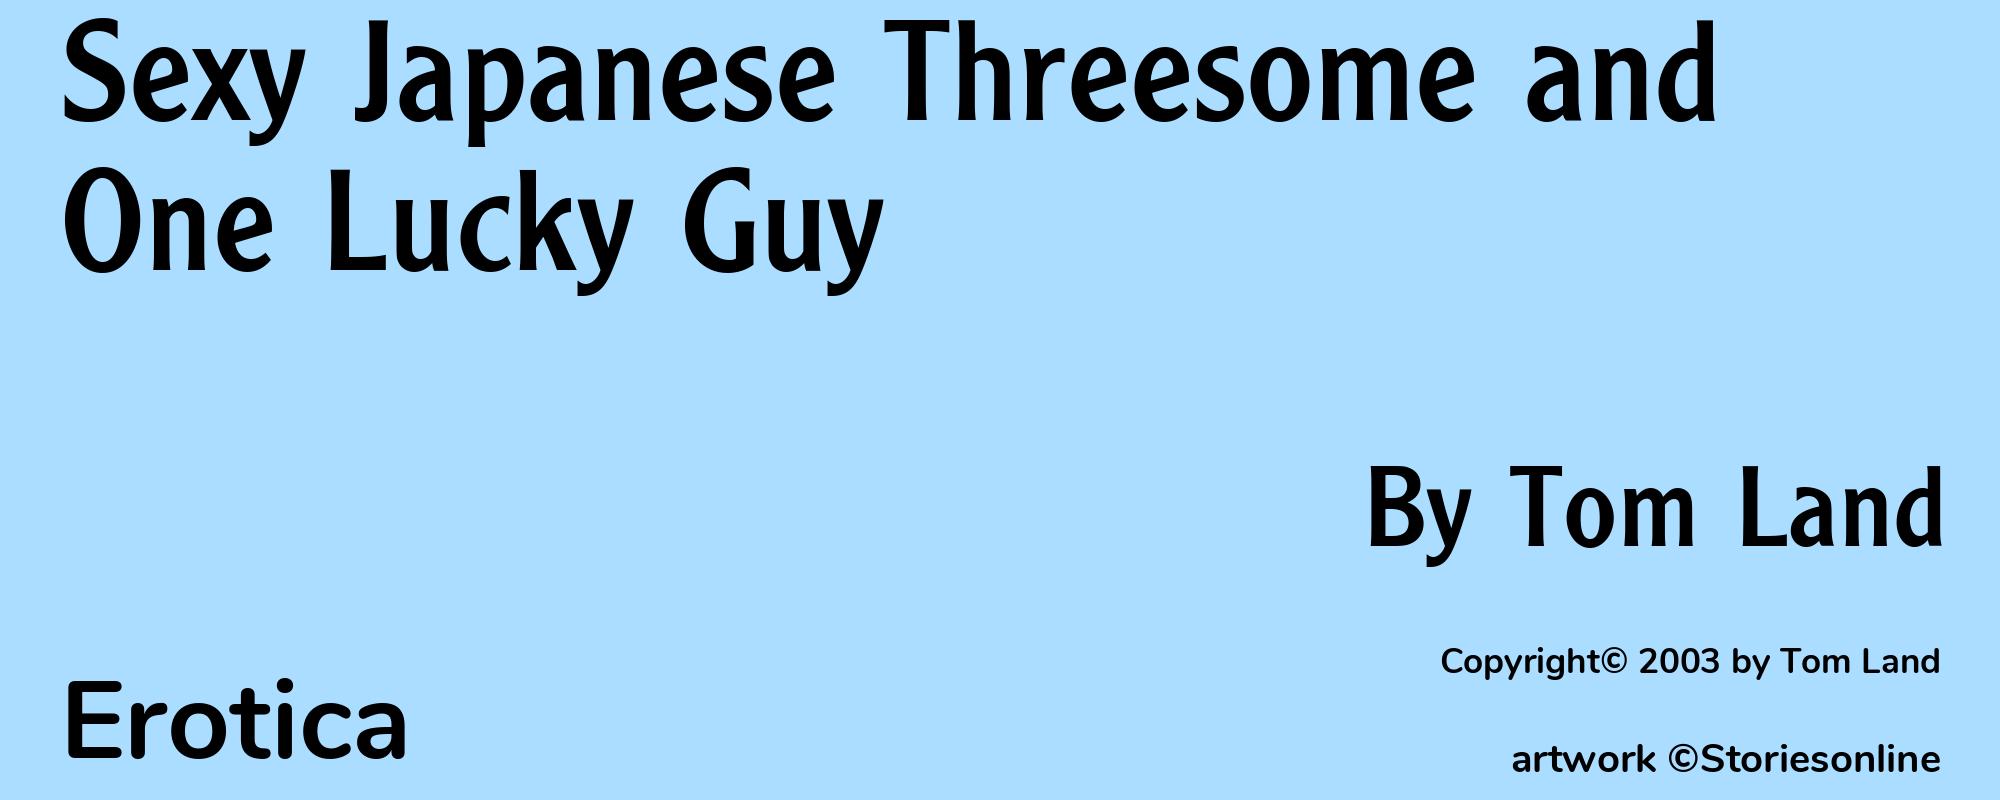 Sexy Japanese Threesome and One Lucky Guy - Cover